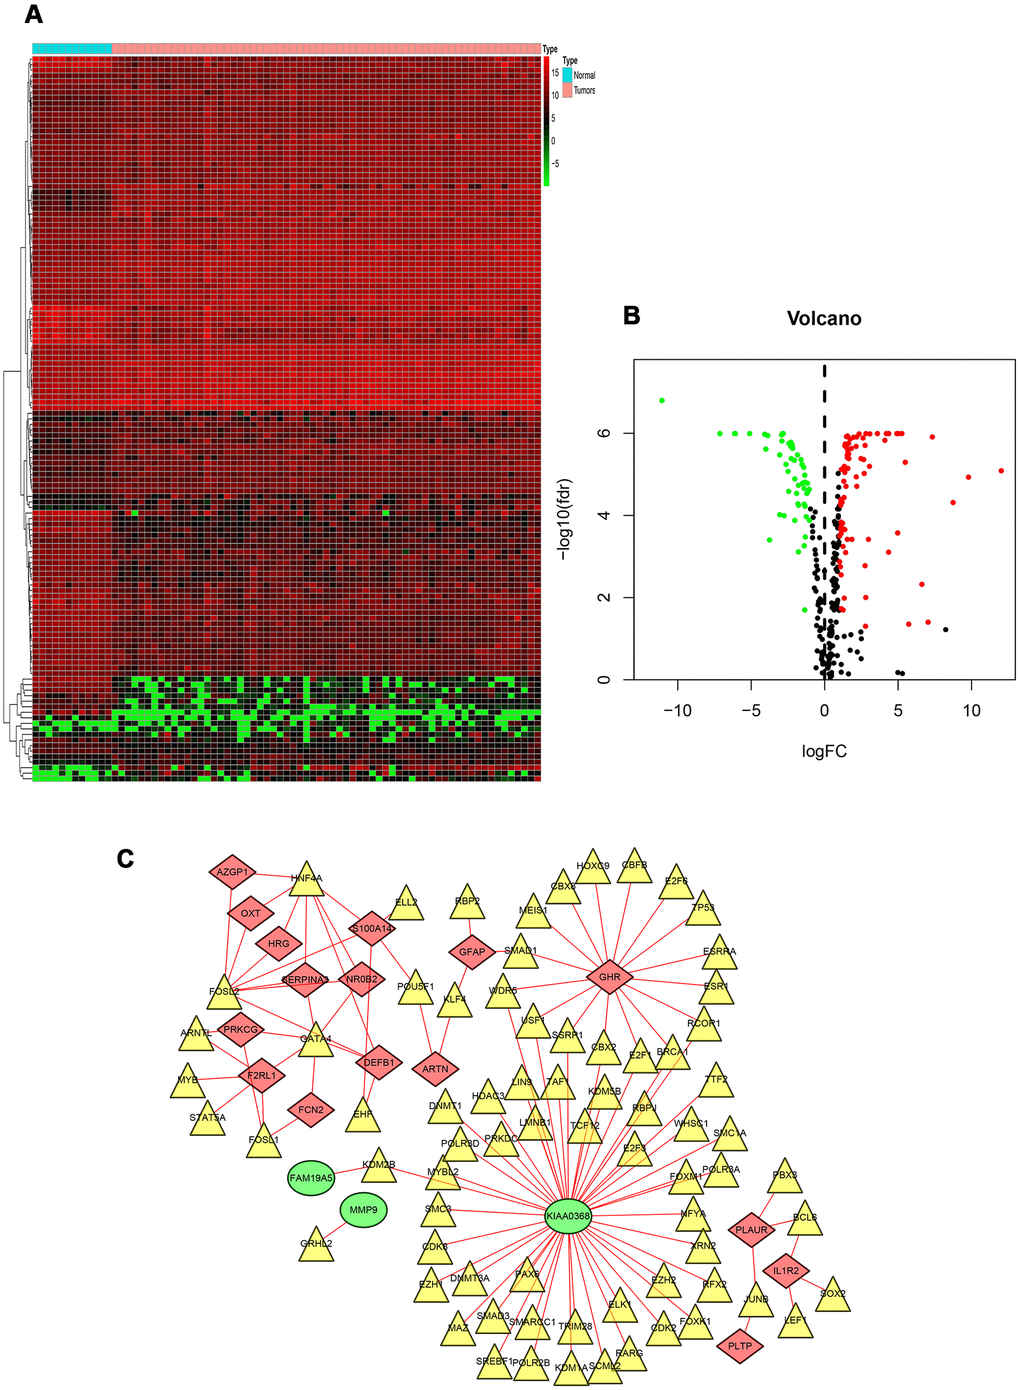 TF-based regulatory network. (A) Heat map of differentially expressed TFs. The green to red spectrum indicates low to high TF expression. (B) Volcano plot of TFs. The green dots represent down-regulated TFs, the red dots represent up-regulated TFs and the black dots represent TFs that were not significantly and differentially expressed. (C) Regulatory network of TFs and PIRGs; the green nodes represent PIRGs with hazard ratios of p 1 (p  0.4 and p 